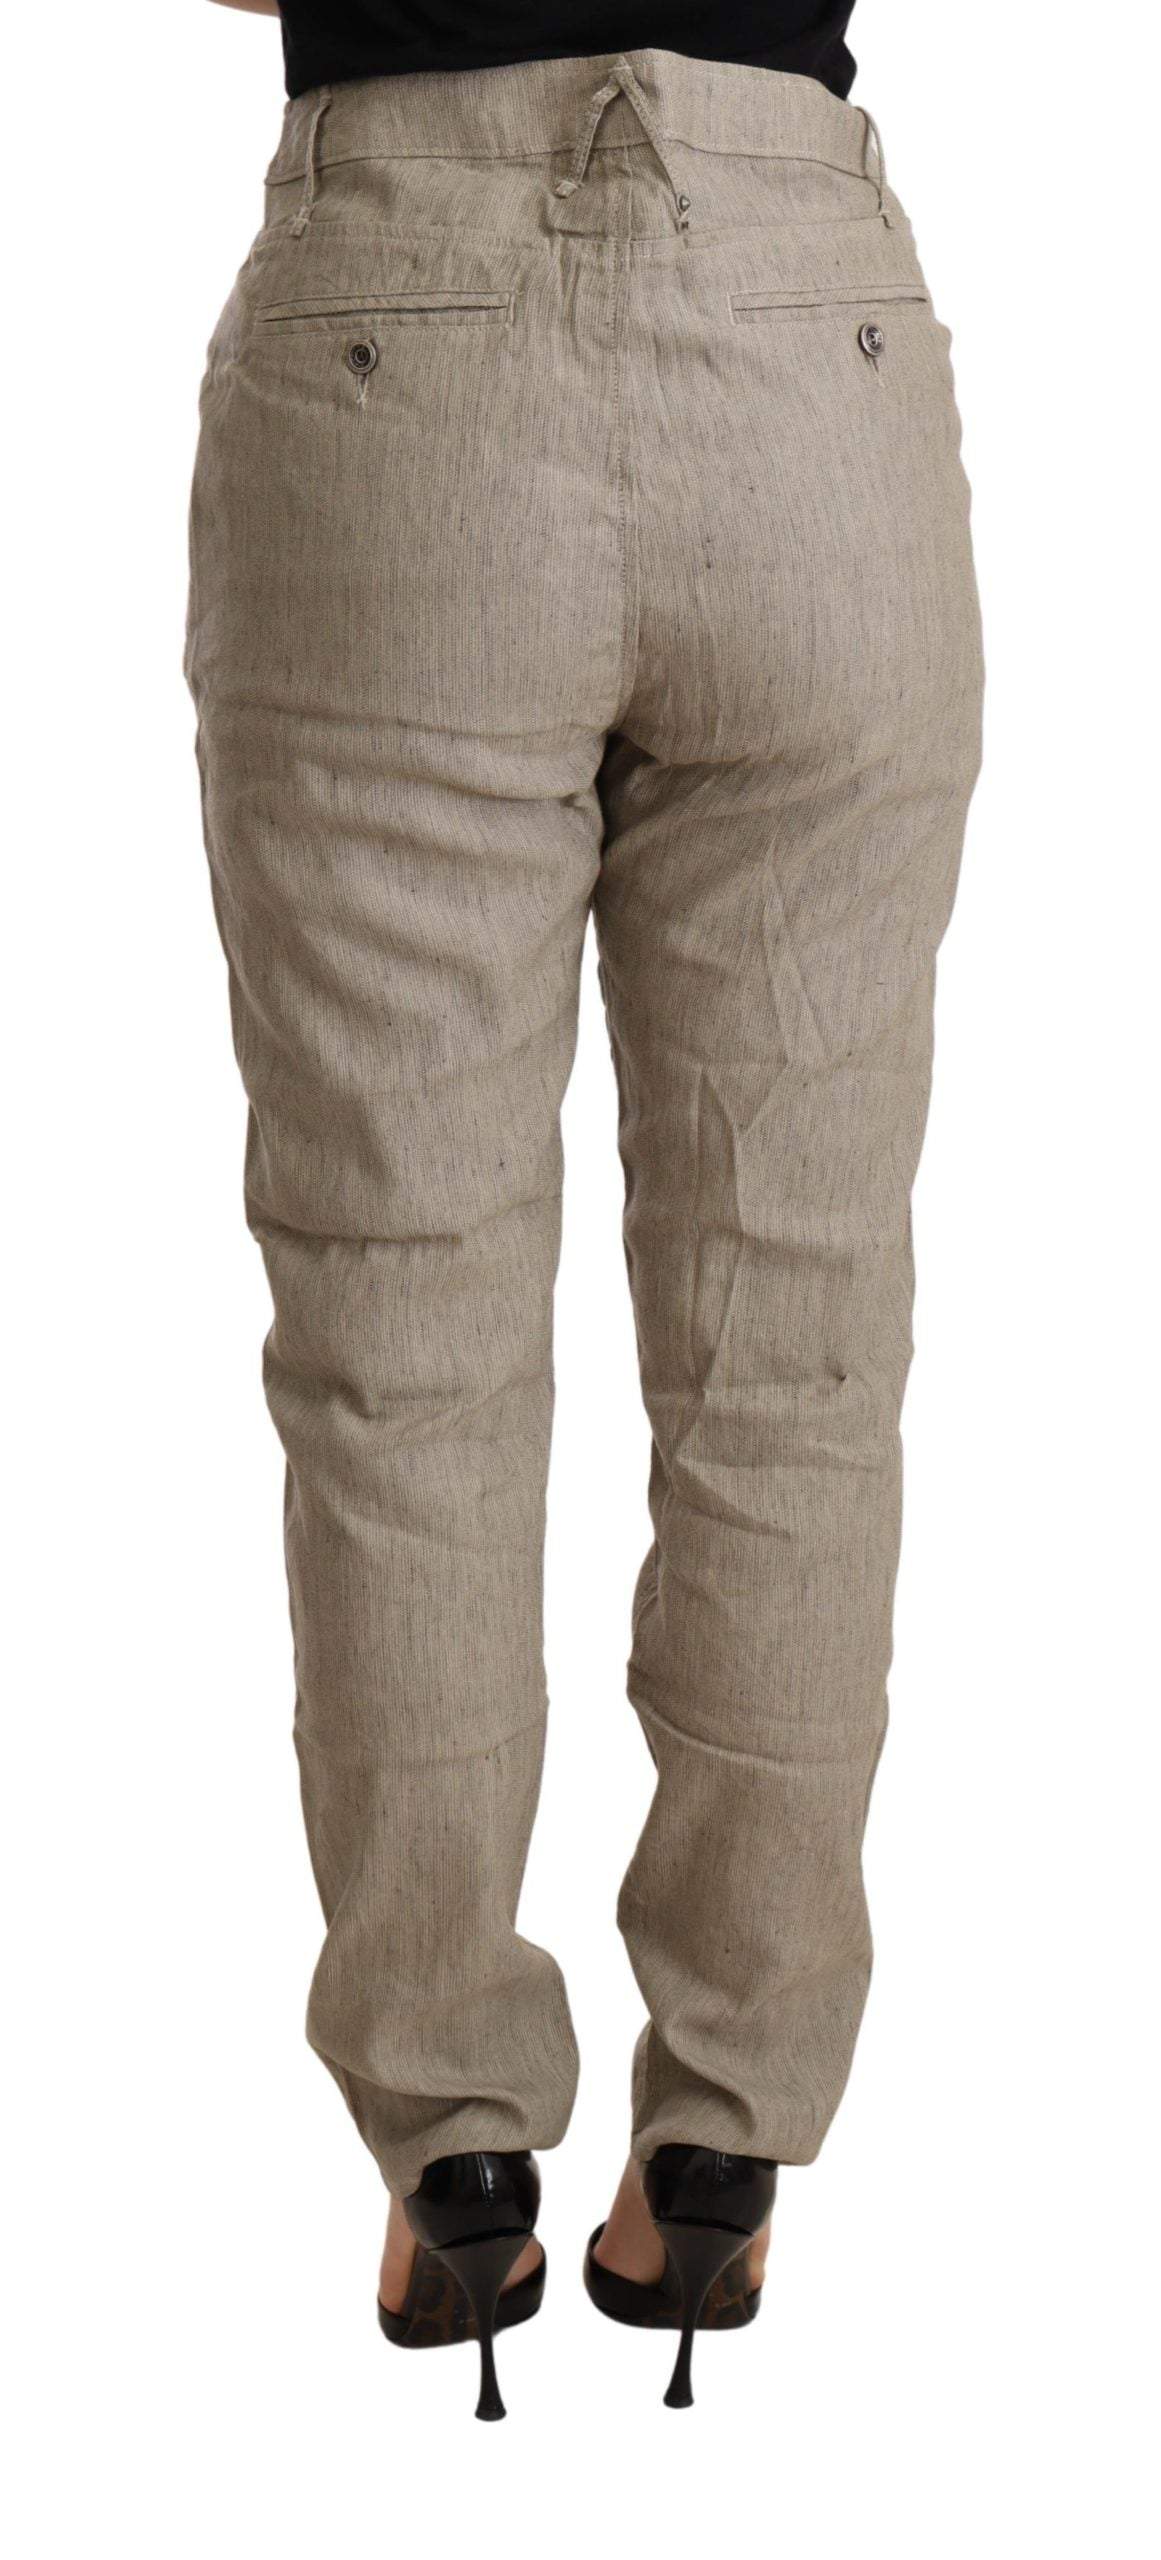 CYCLE Beige Mid Waist Casual Baggy Stretch Trouser Beige, CYCLE, feed-agegroup-adult, feed-color-Beige, feed-gender-female, Jeans & Pants - Women - Clothing, W26 at SEYMAYKA